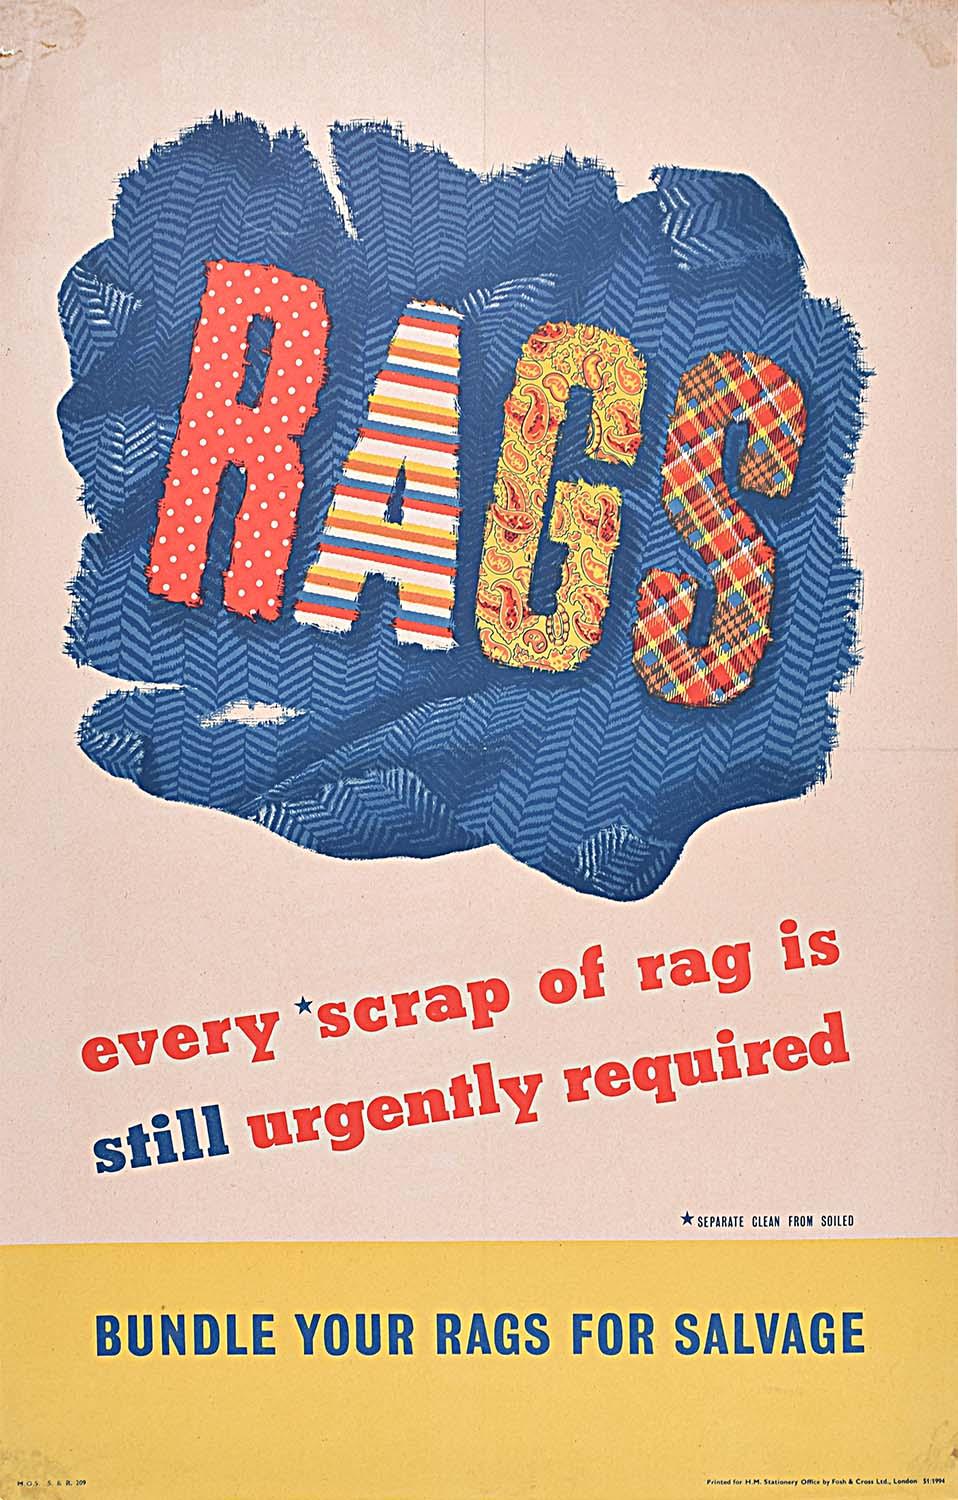 Rags Every bit of rag still urgently required WW2 British Home Front Poster